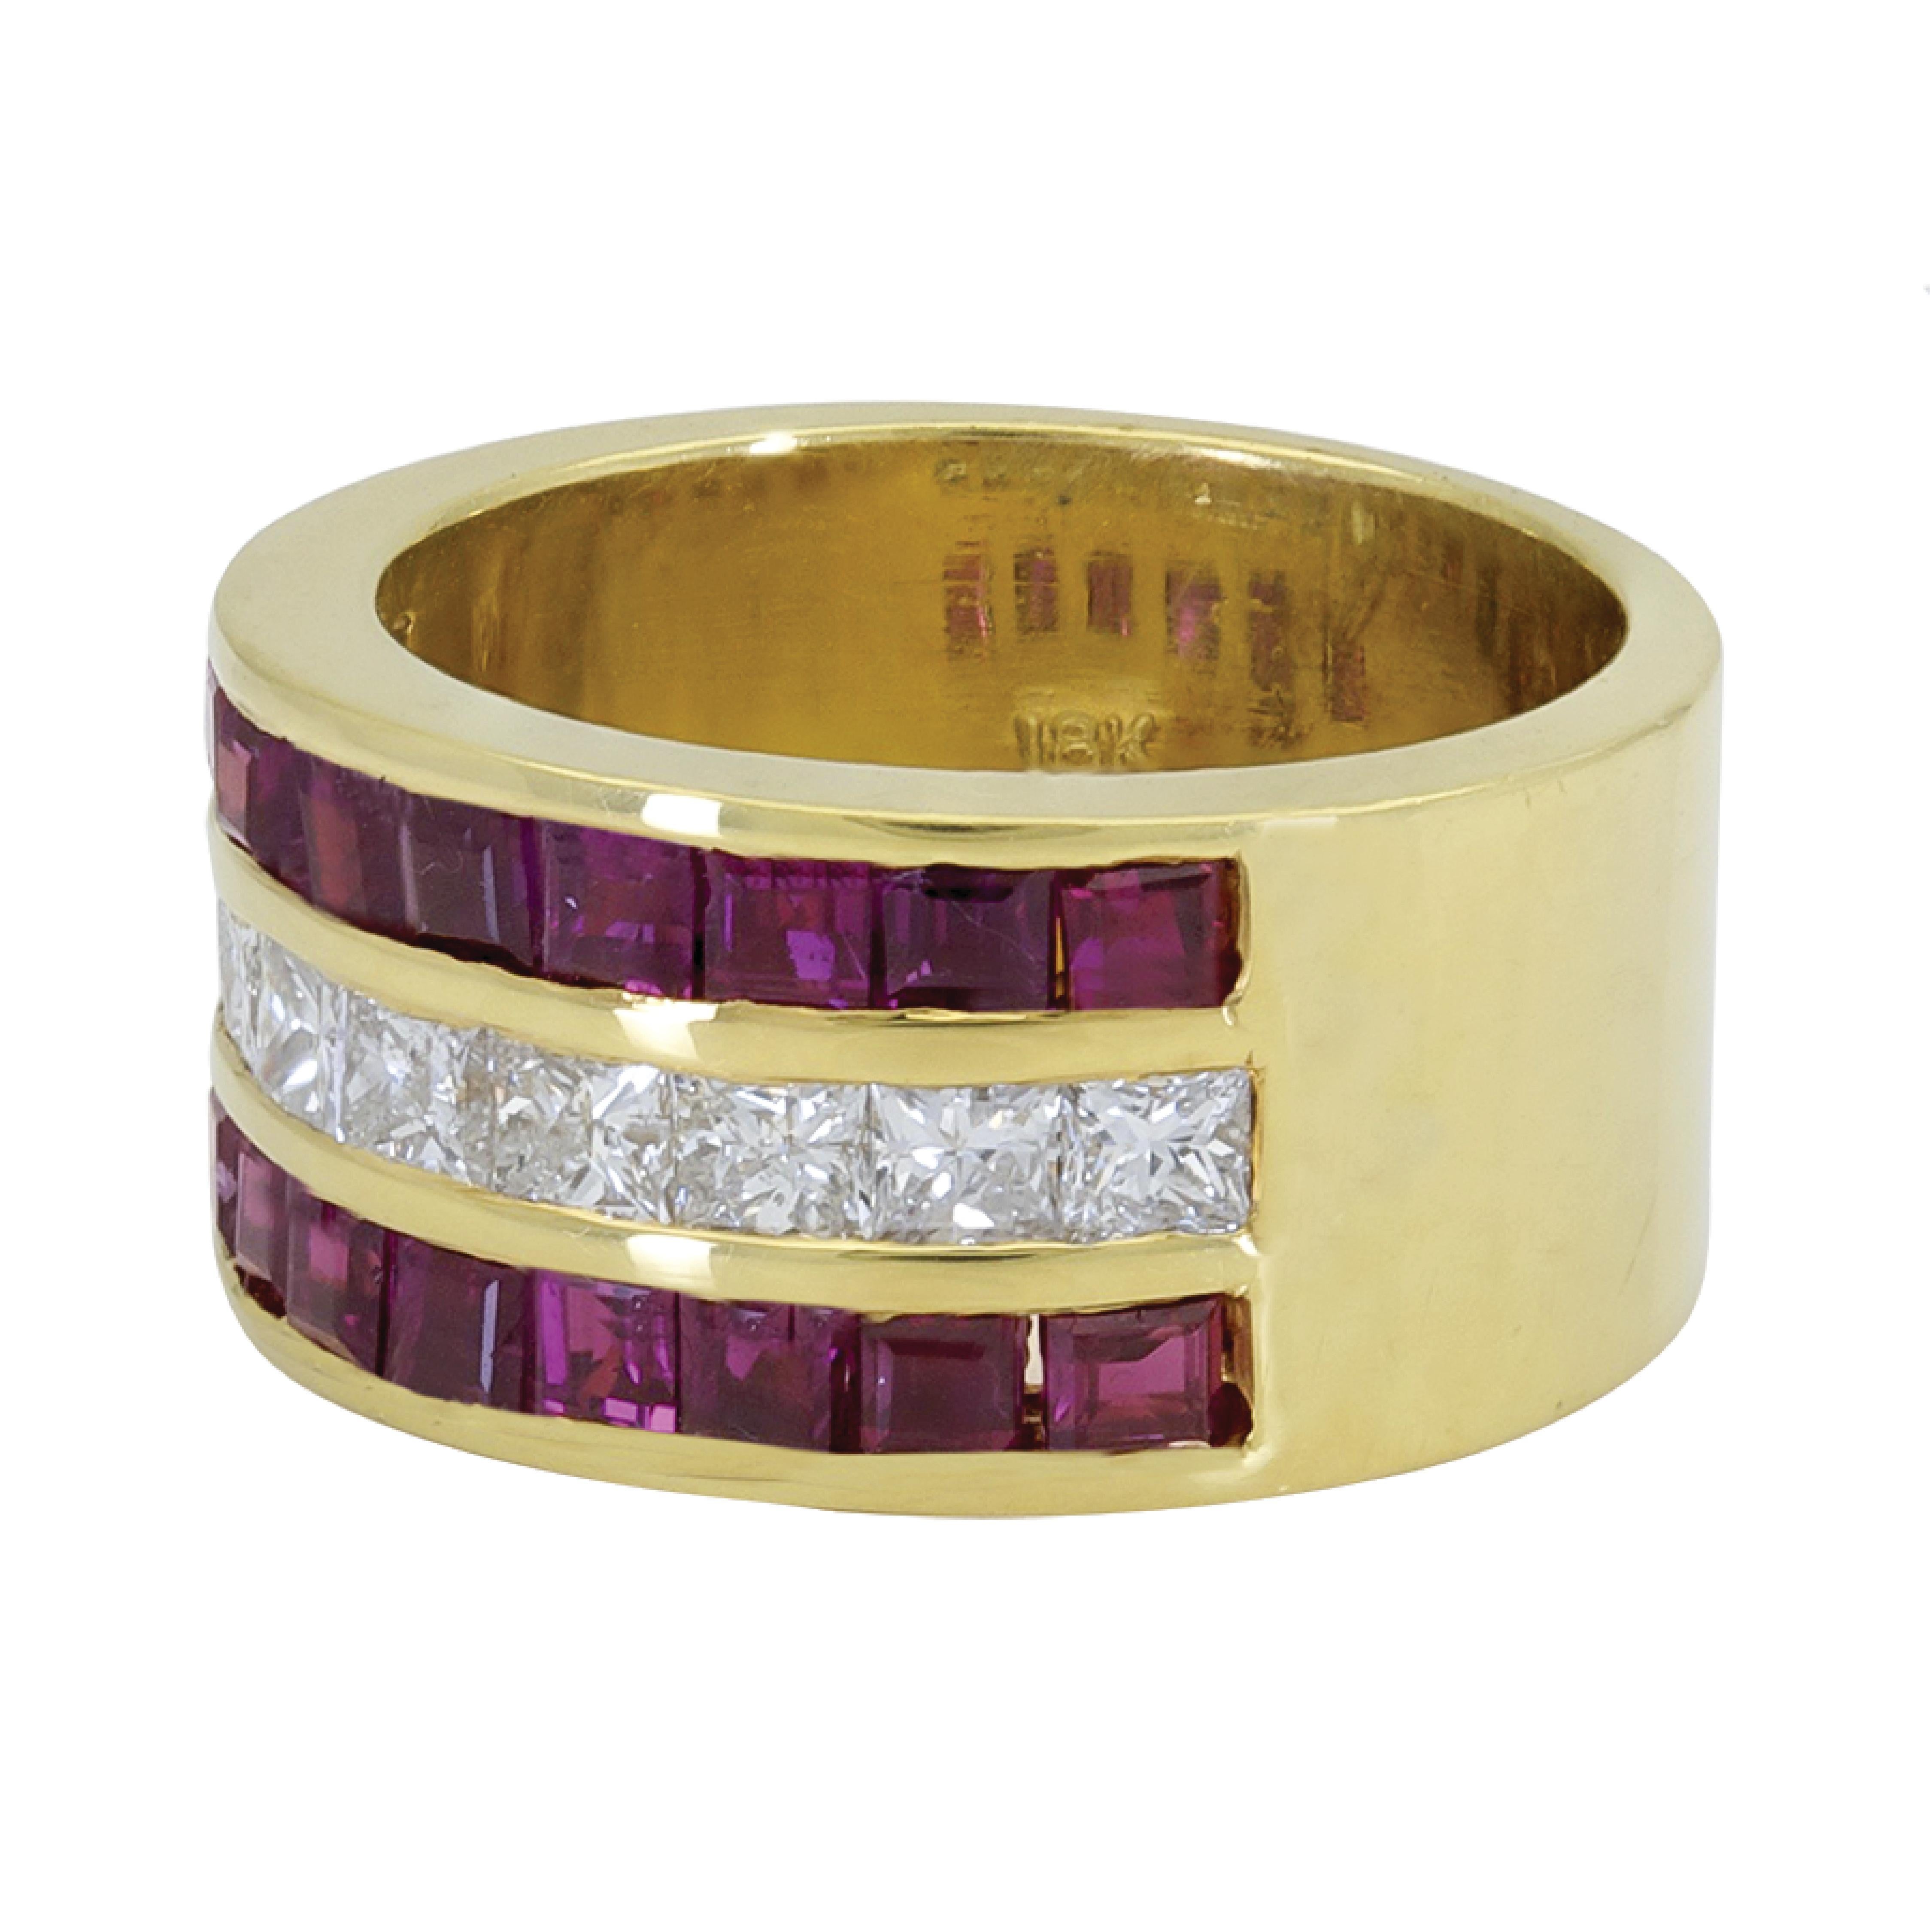 18 karat yellow gold 1.61 carats total weights of diamonds surrounded by 1.98 carats of rubies Dome Ring 

Sophia D by Joseph Dardashti LTD has been known worldwide for 35 years and are inspired by classic Art Deco design that merges with modern